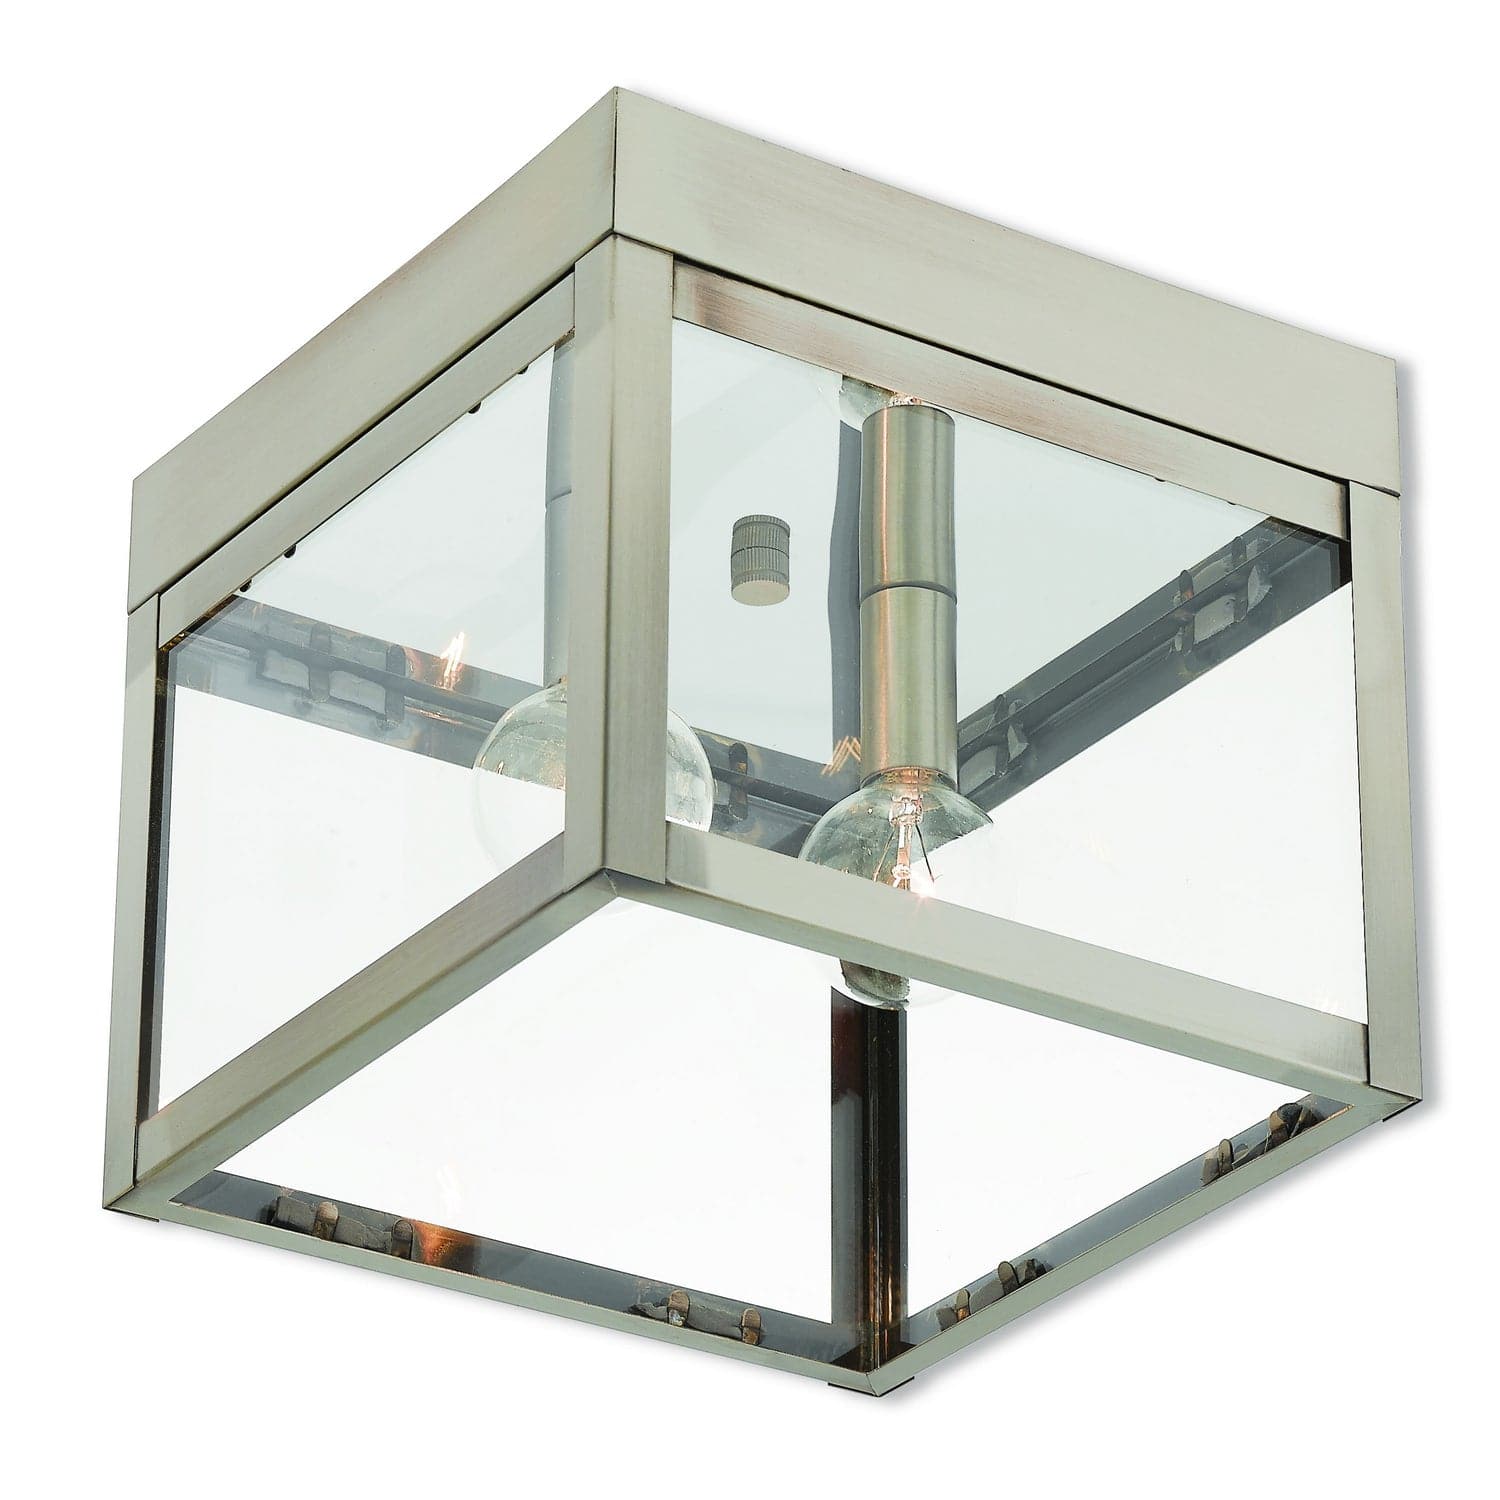 Livex Lighting - 20588-91 - Two Light Outdoor Ceiling Mount - Nyack - Brushed Nickel w/ Polished Chrome Stainless Steel